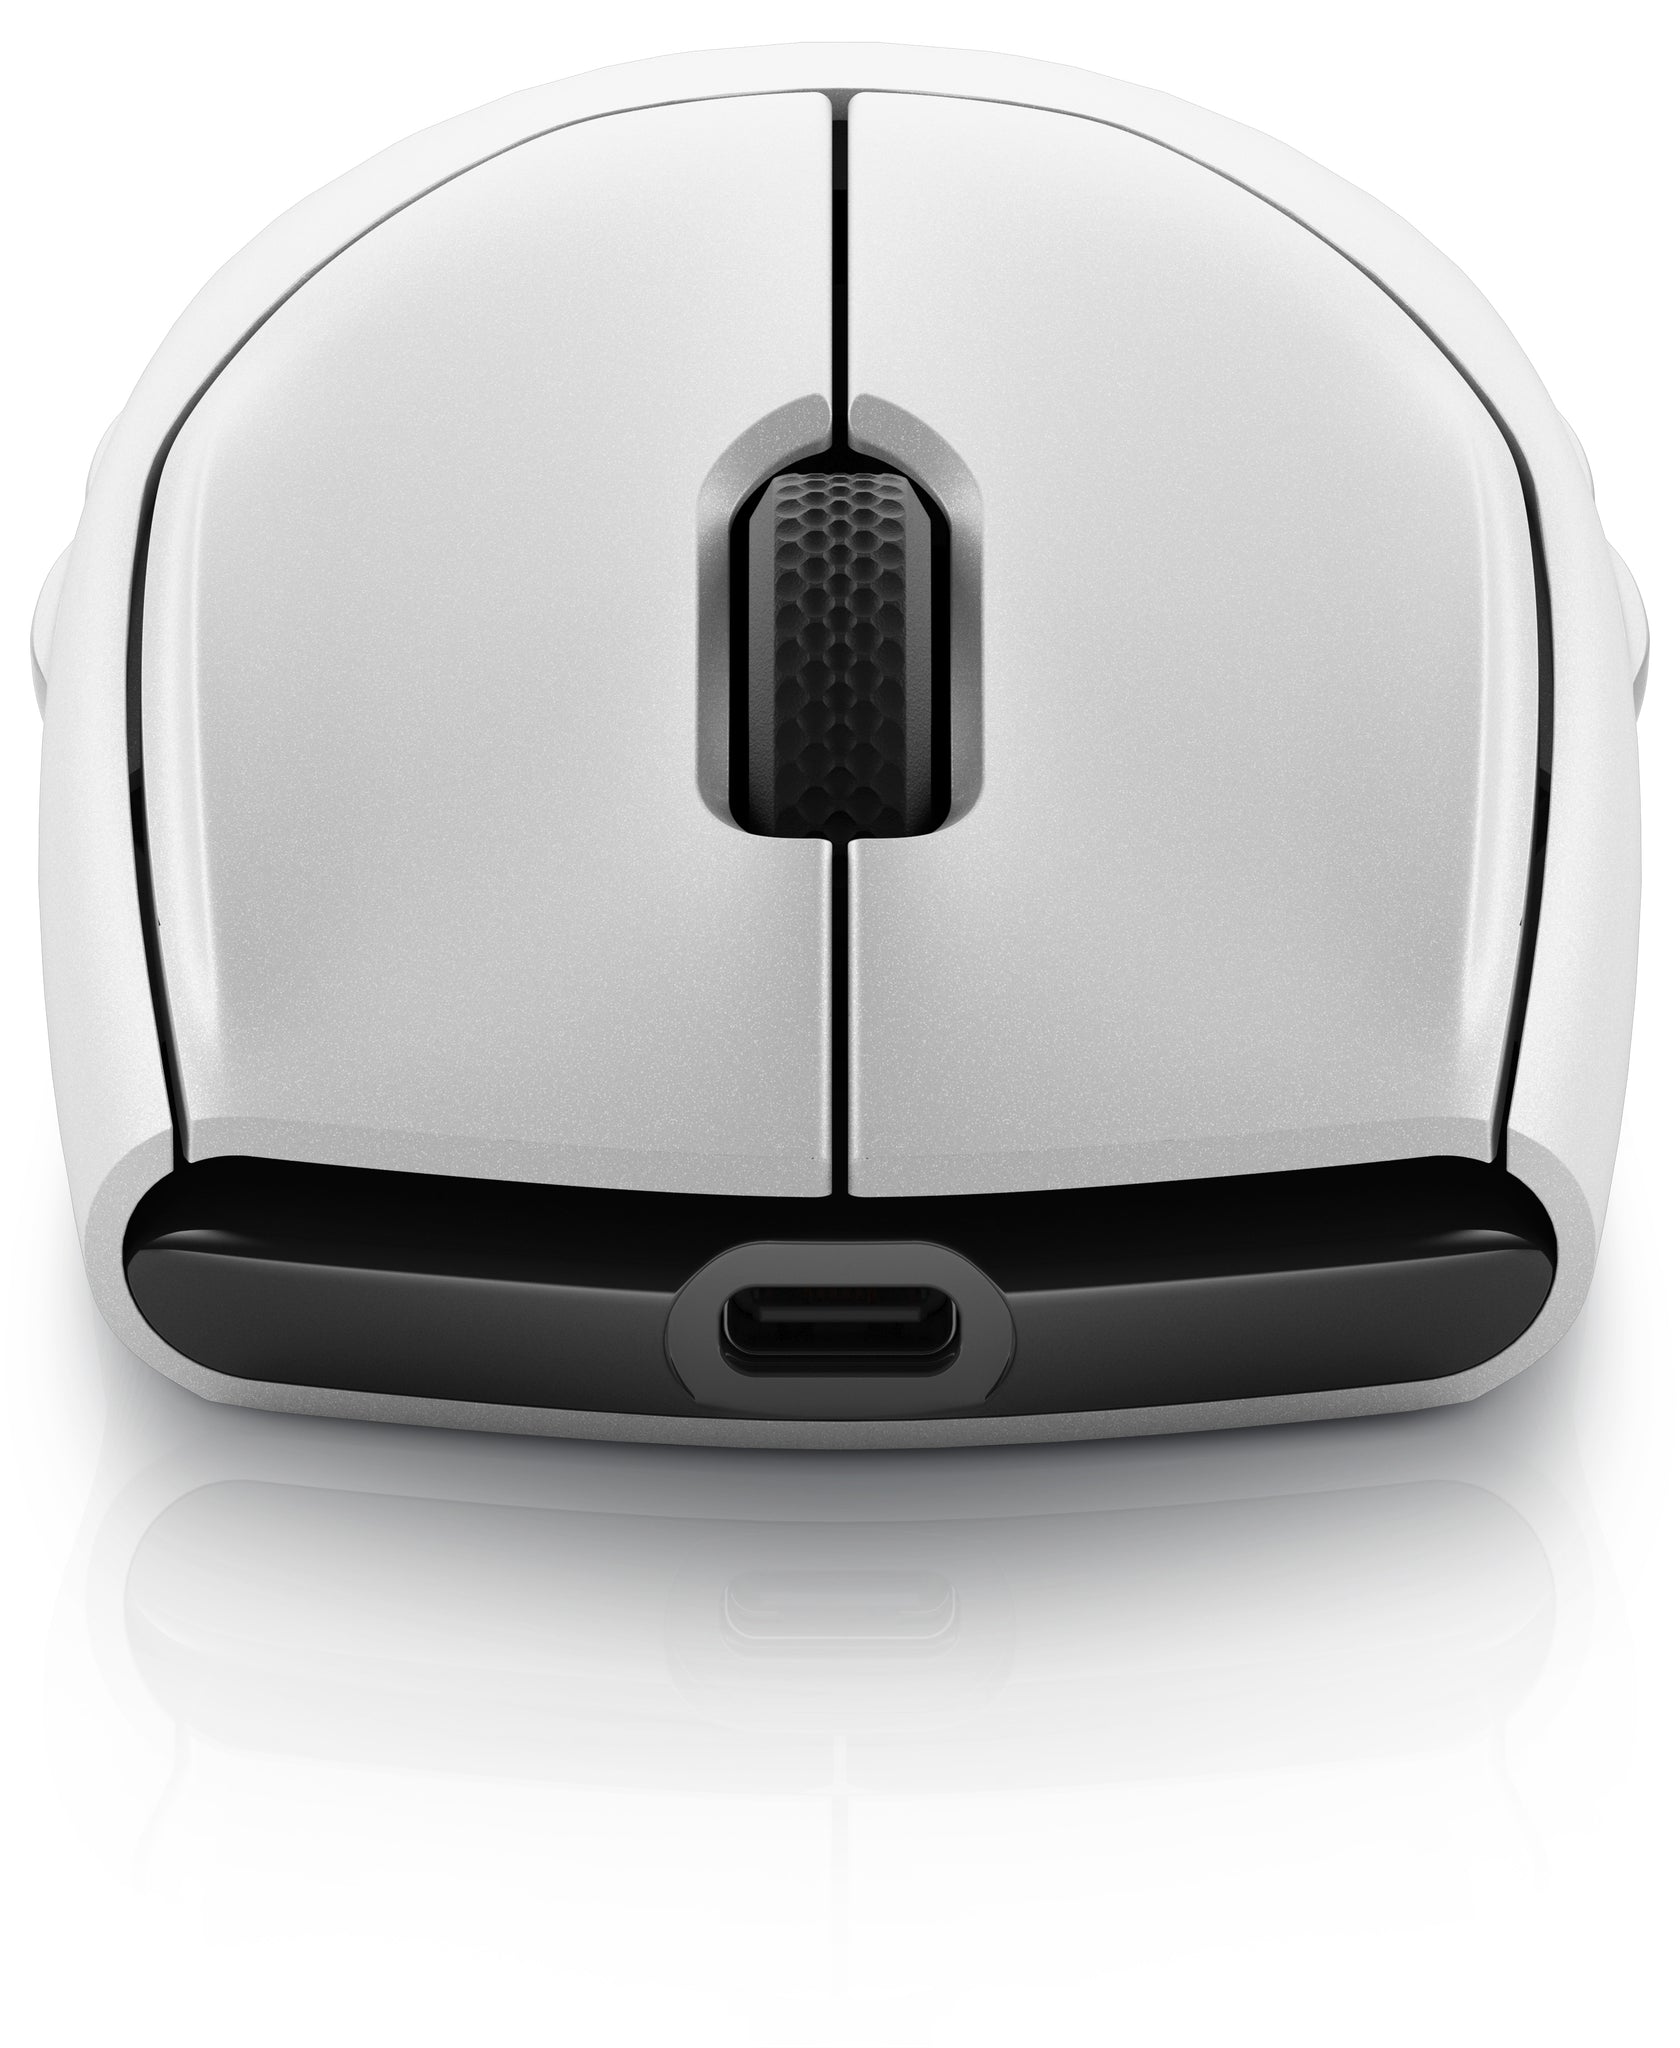 Alienware AW720M Tri-Mode Wireless Gaming Mouse